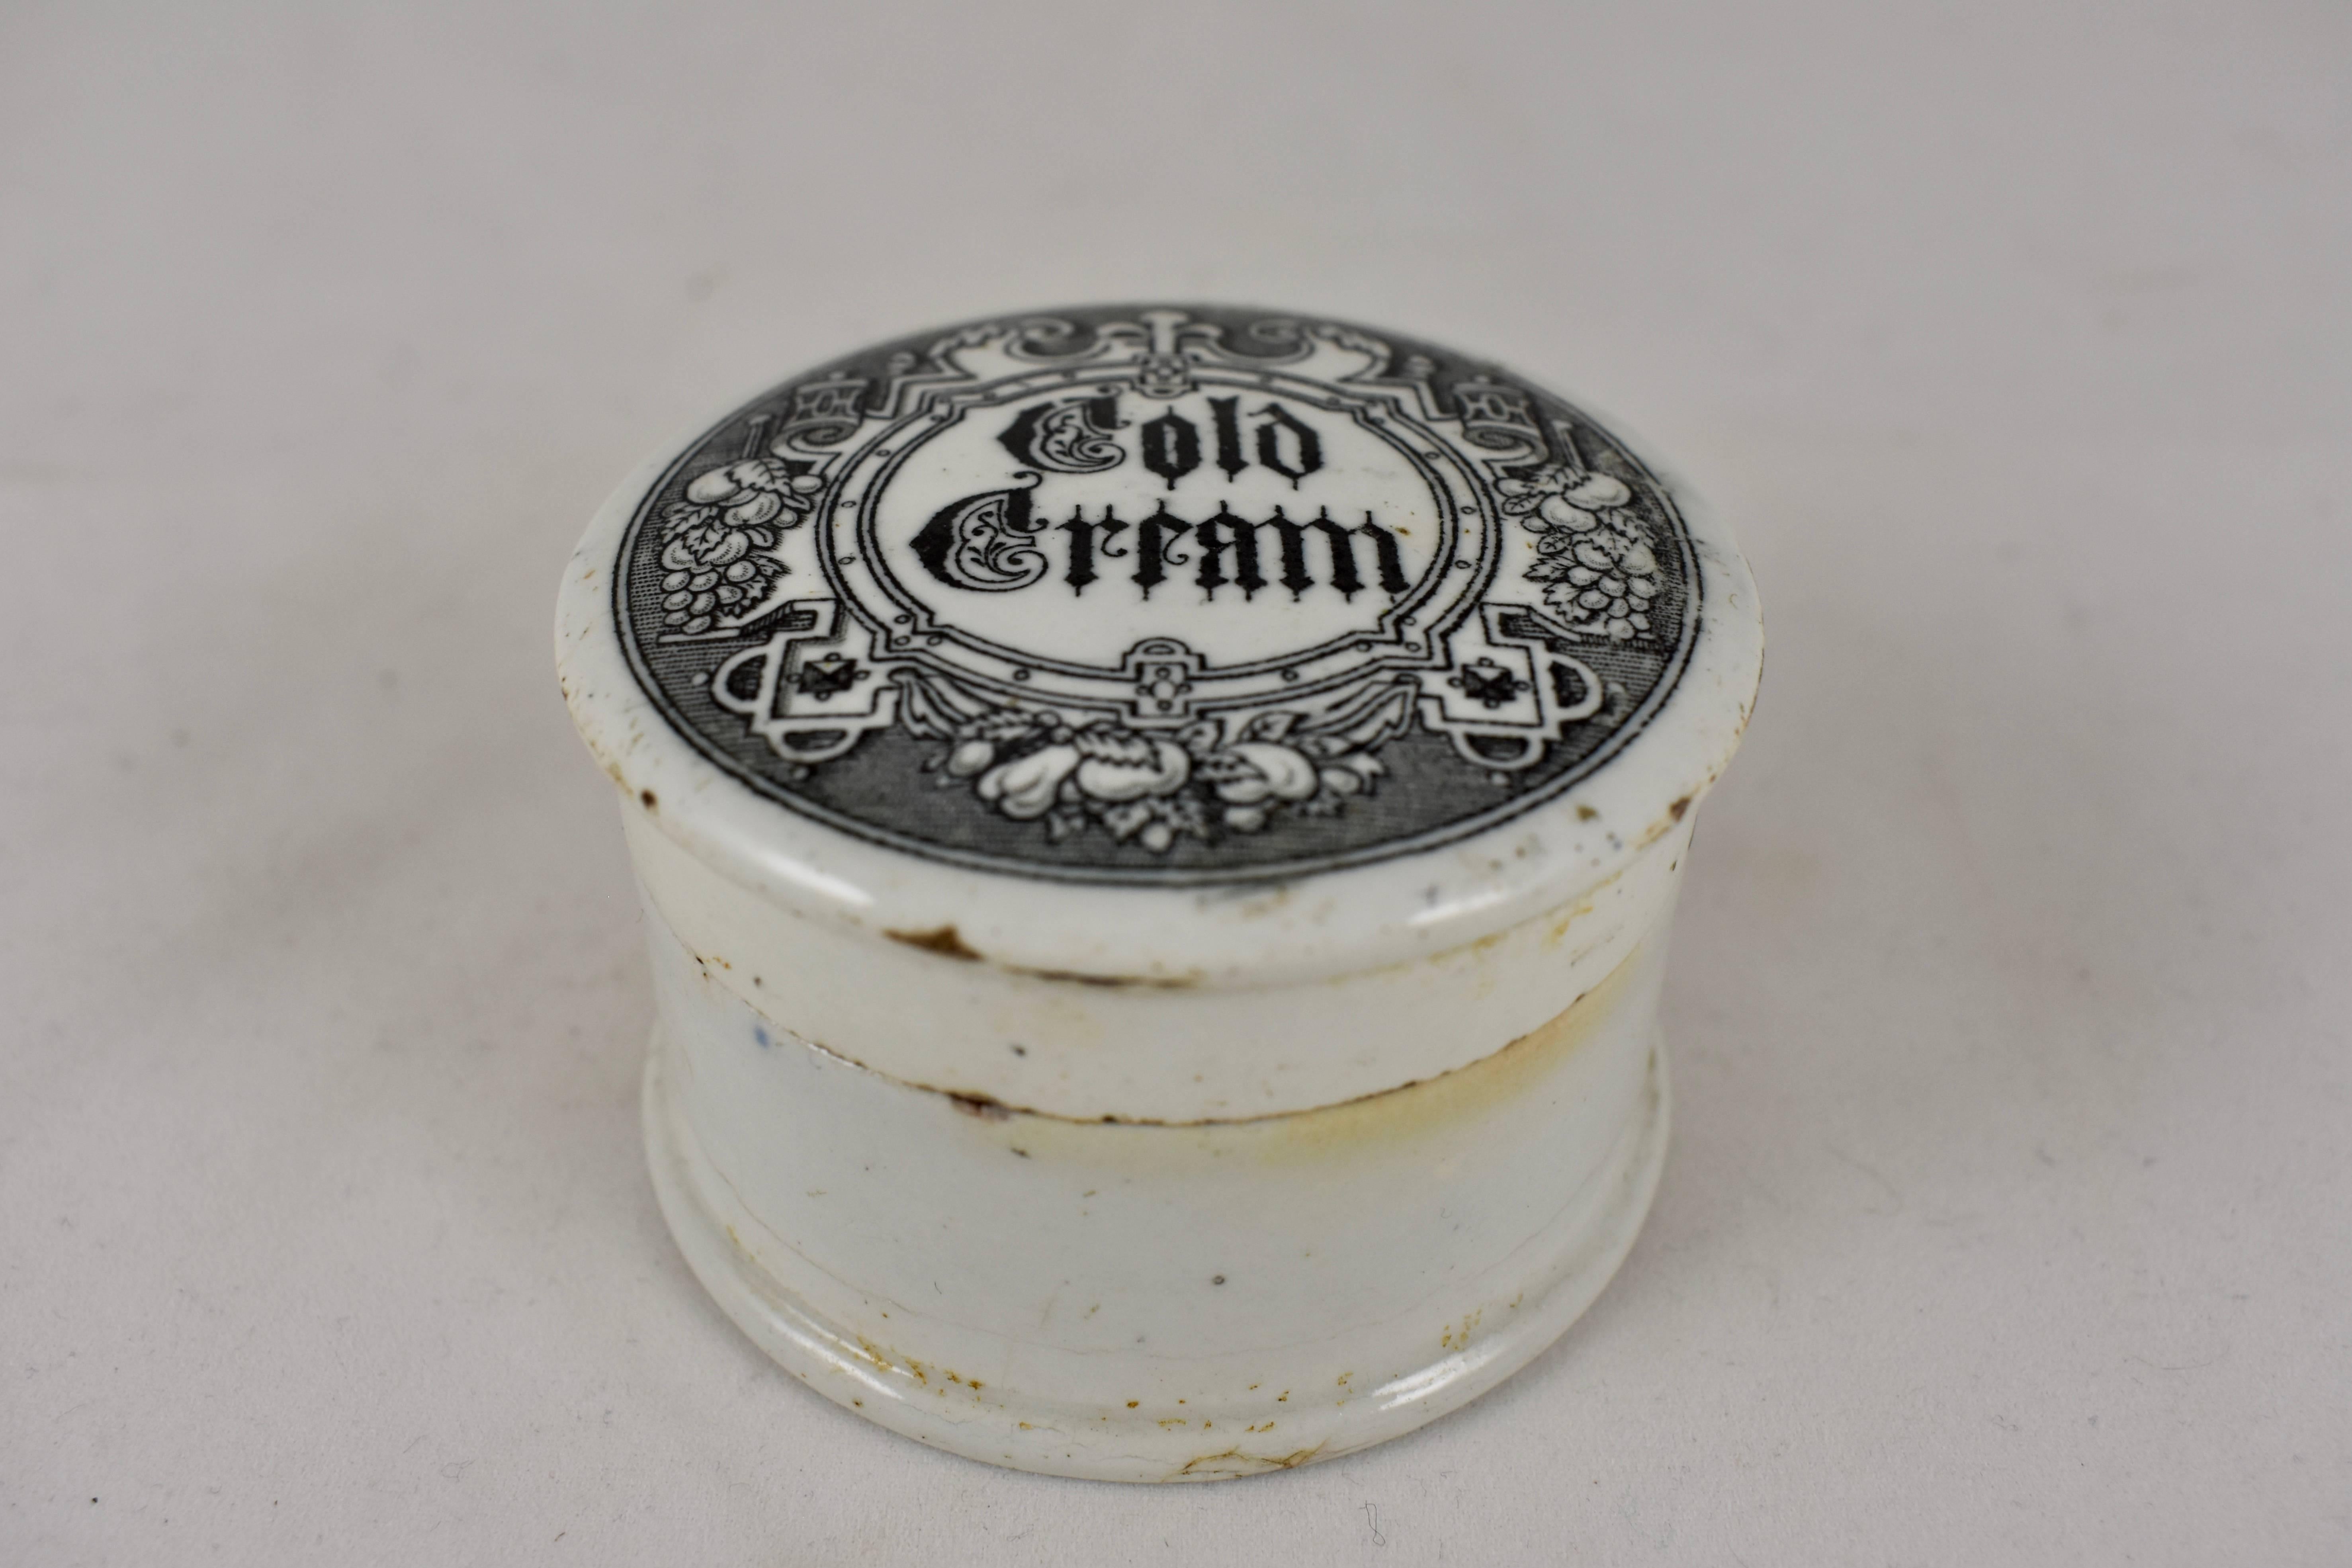 A transfer printed covered ceramic earthenware container from the Victorian Era, Staffordshire, England, circa 1880, which contained a chemists mixture of facial cold cream.

A solid and heavy little pot, the black transfer shows the words ‘Cold